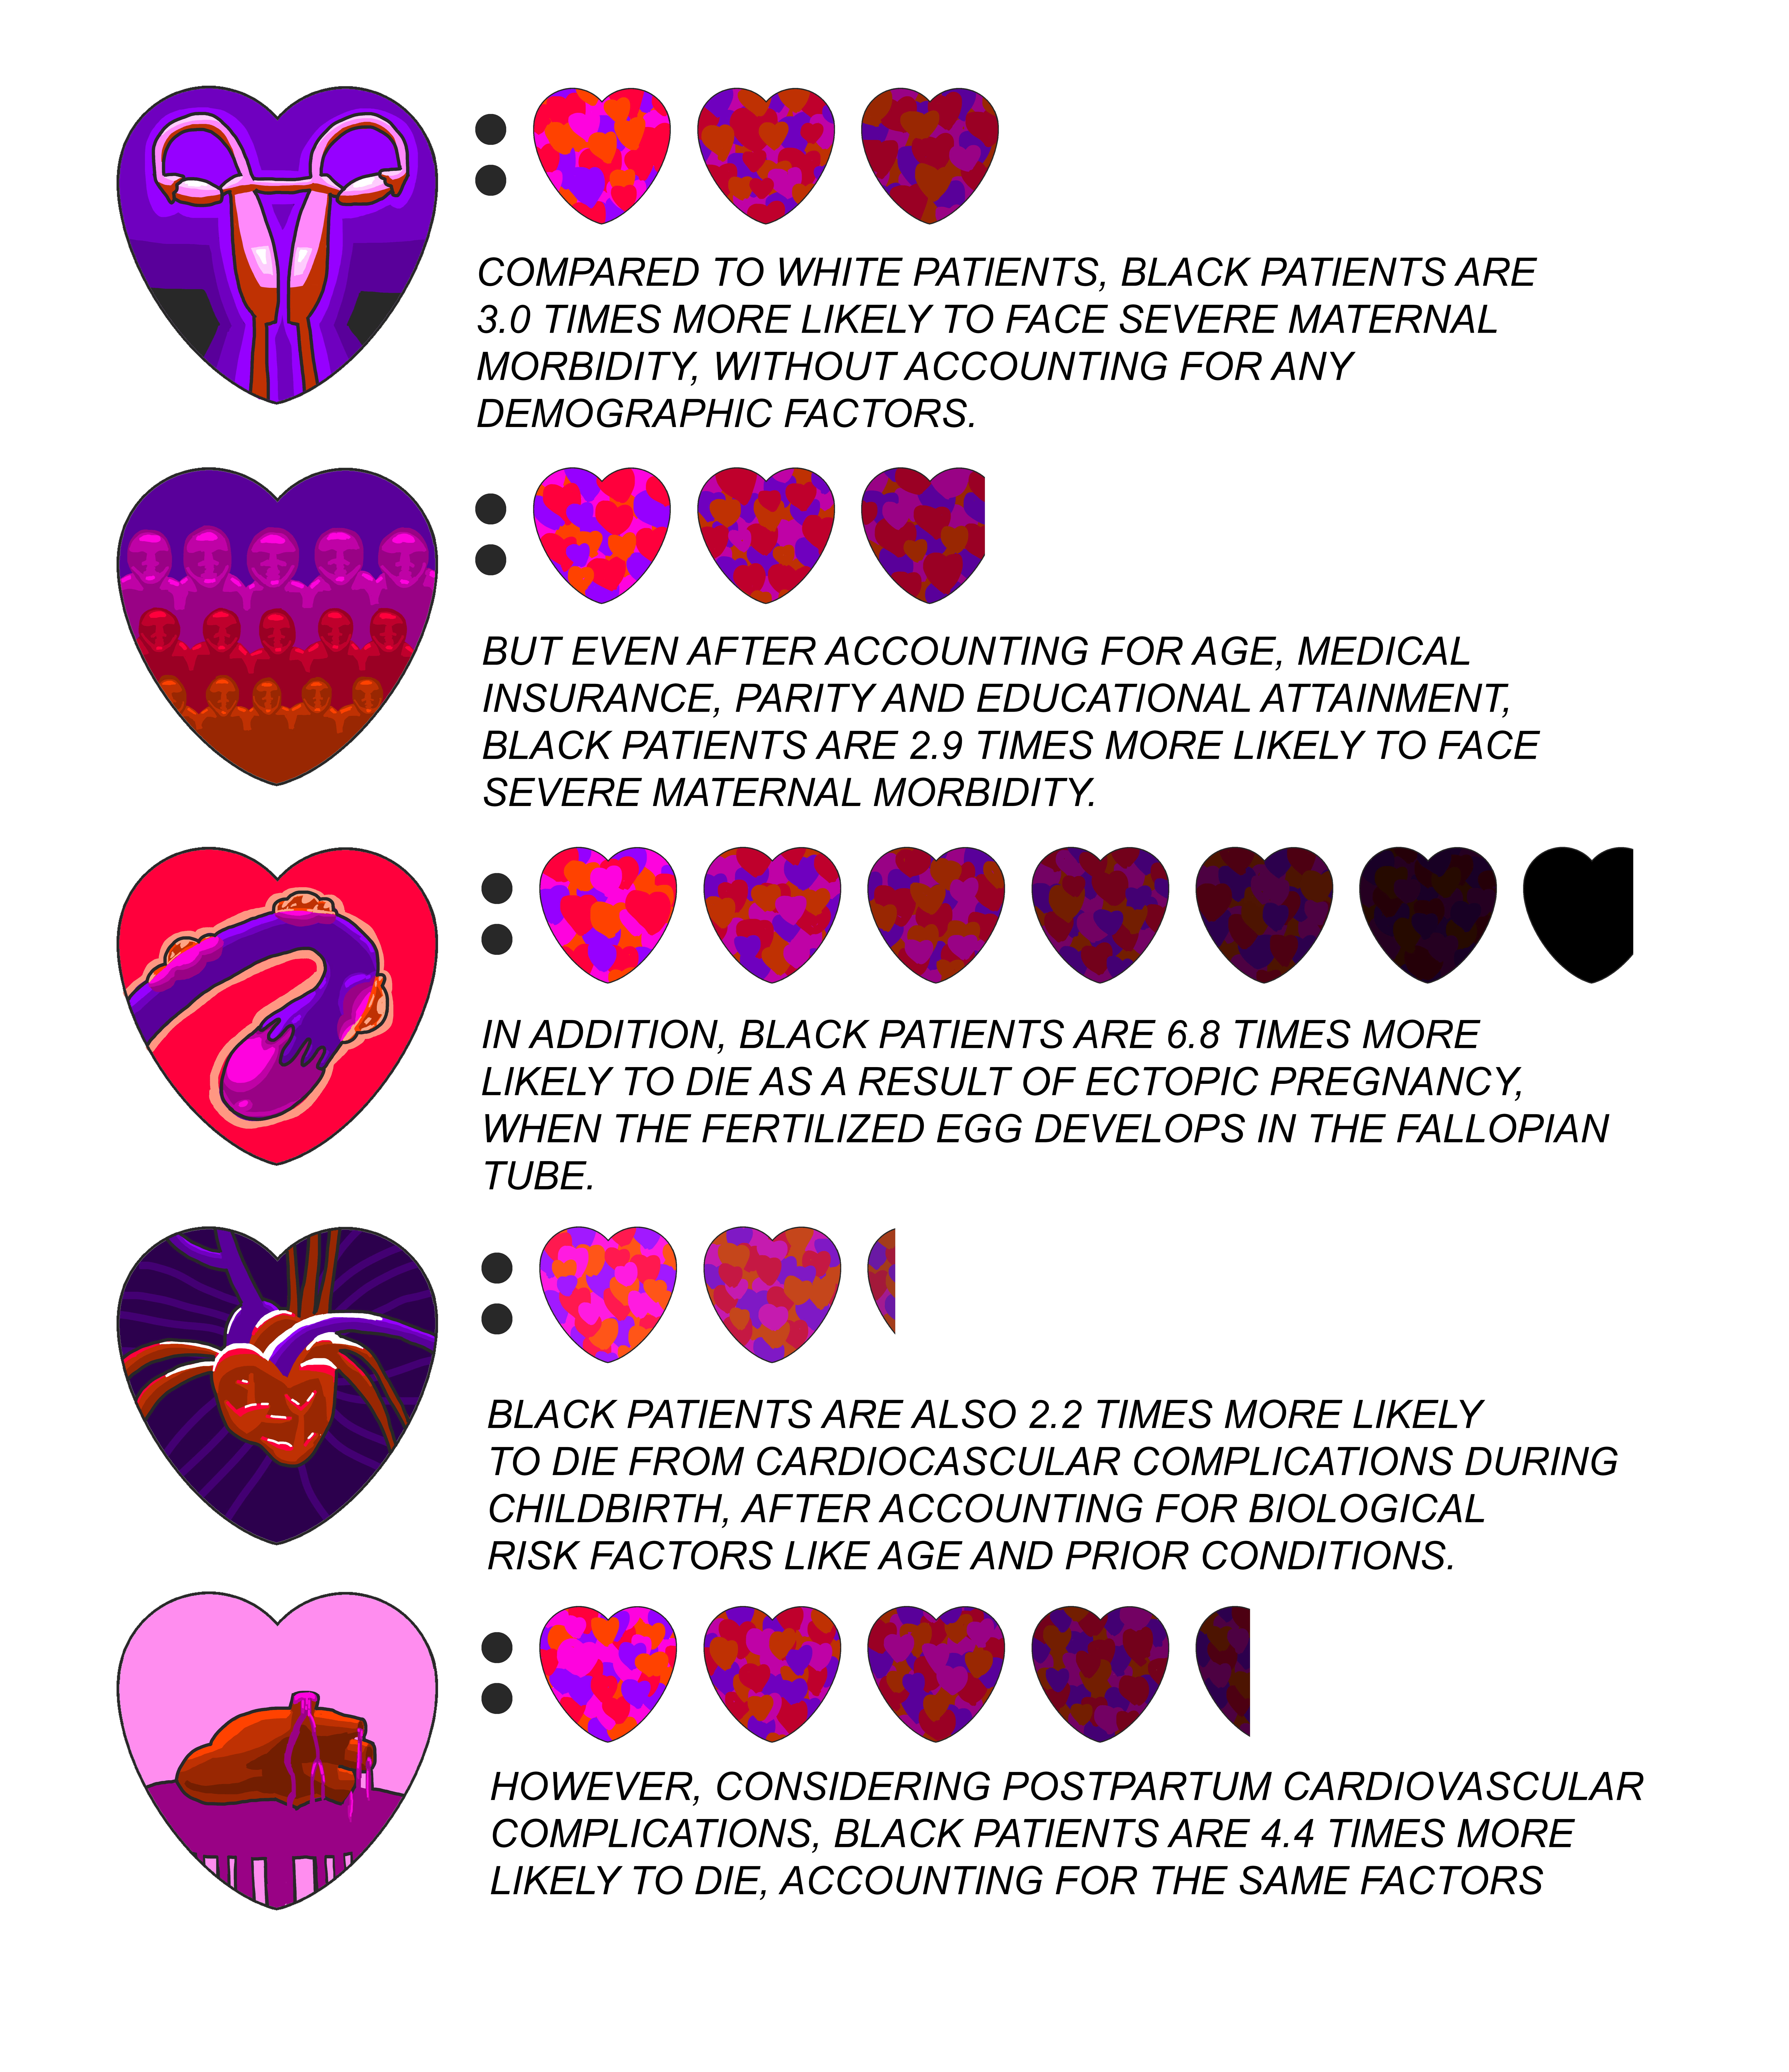 Five rows of hearts, with one large heart, a colon, and multiple smaller hearts on each row. The number of smaller hearts represent the relative increase in risk of a morbidity and mortality outcome among Black women as compared to white women. Pink, red, and purple hues are used, and imagery related to the outcome are embedded within the big hearts, such as a fallopian tube for death from ectopic pregnancy.